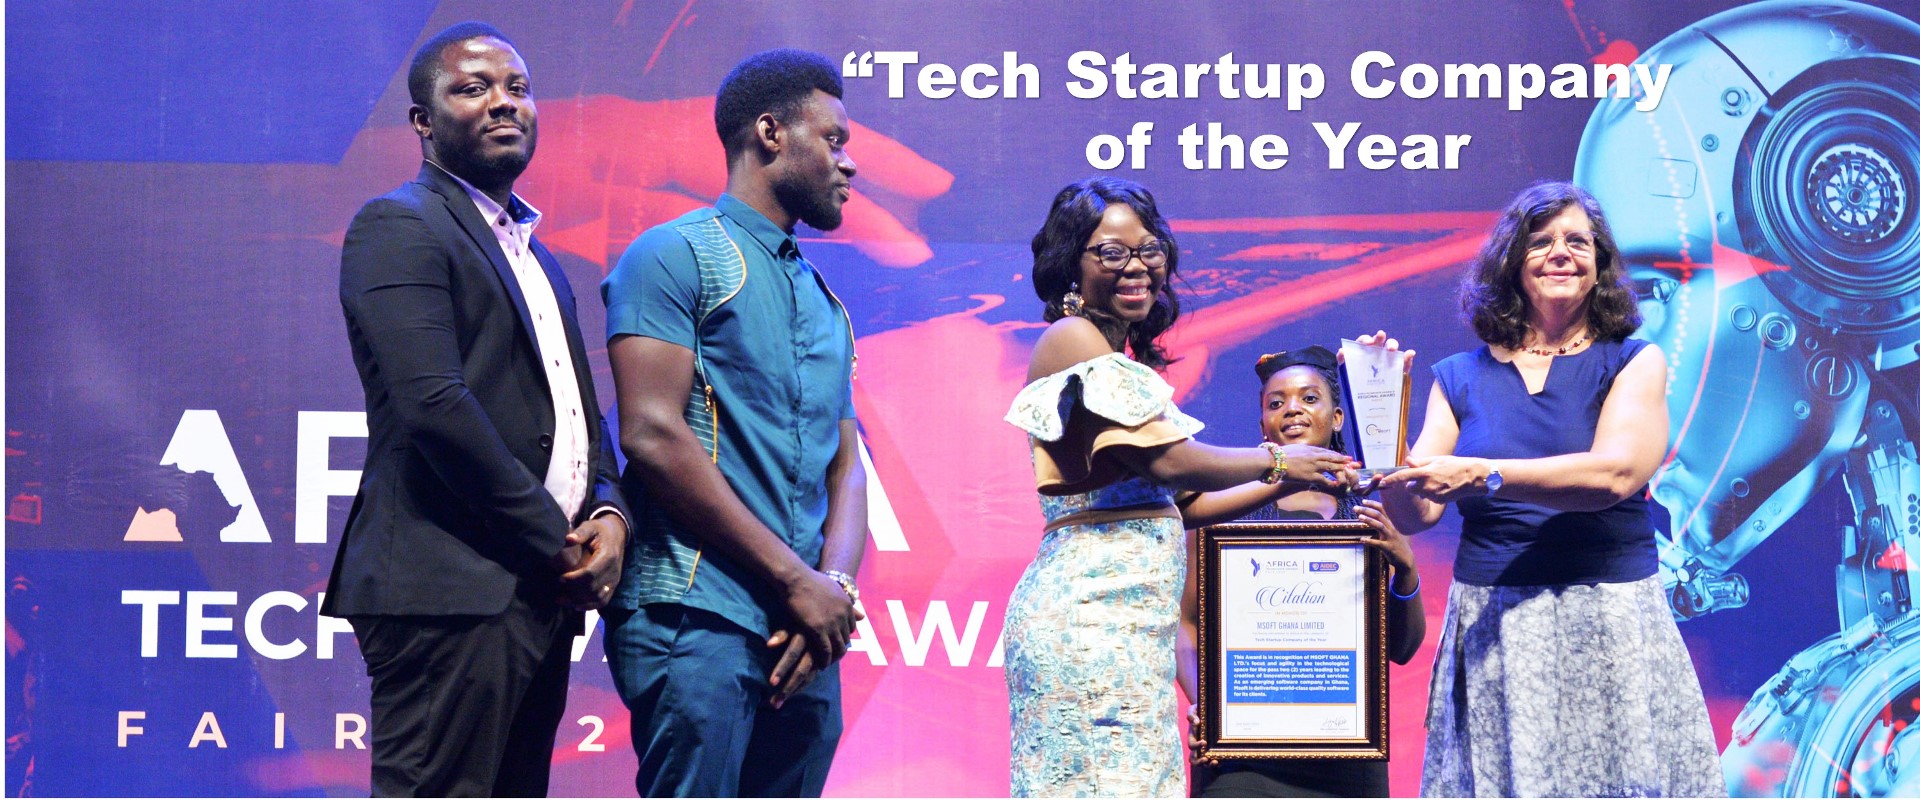 Starup It Company Of The Year1